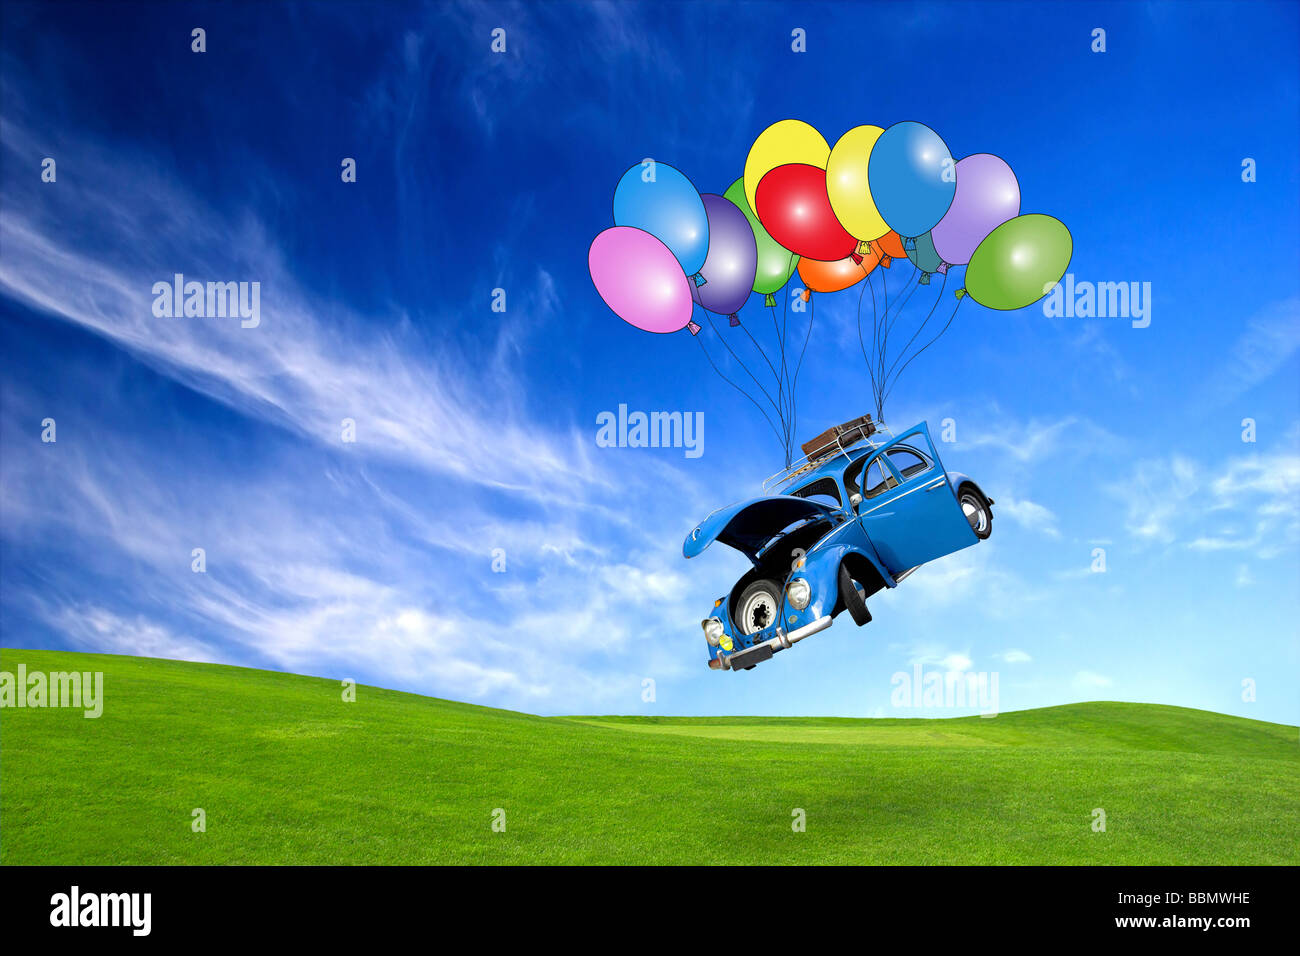 Beautiful beetle car with door s open falling from the sky with ballons Stock Photo